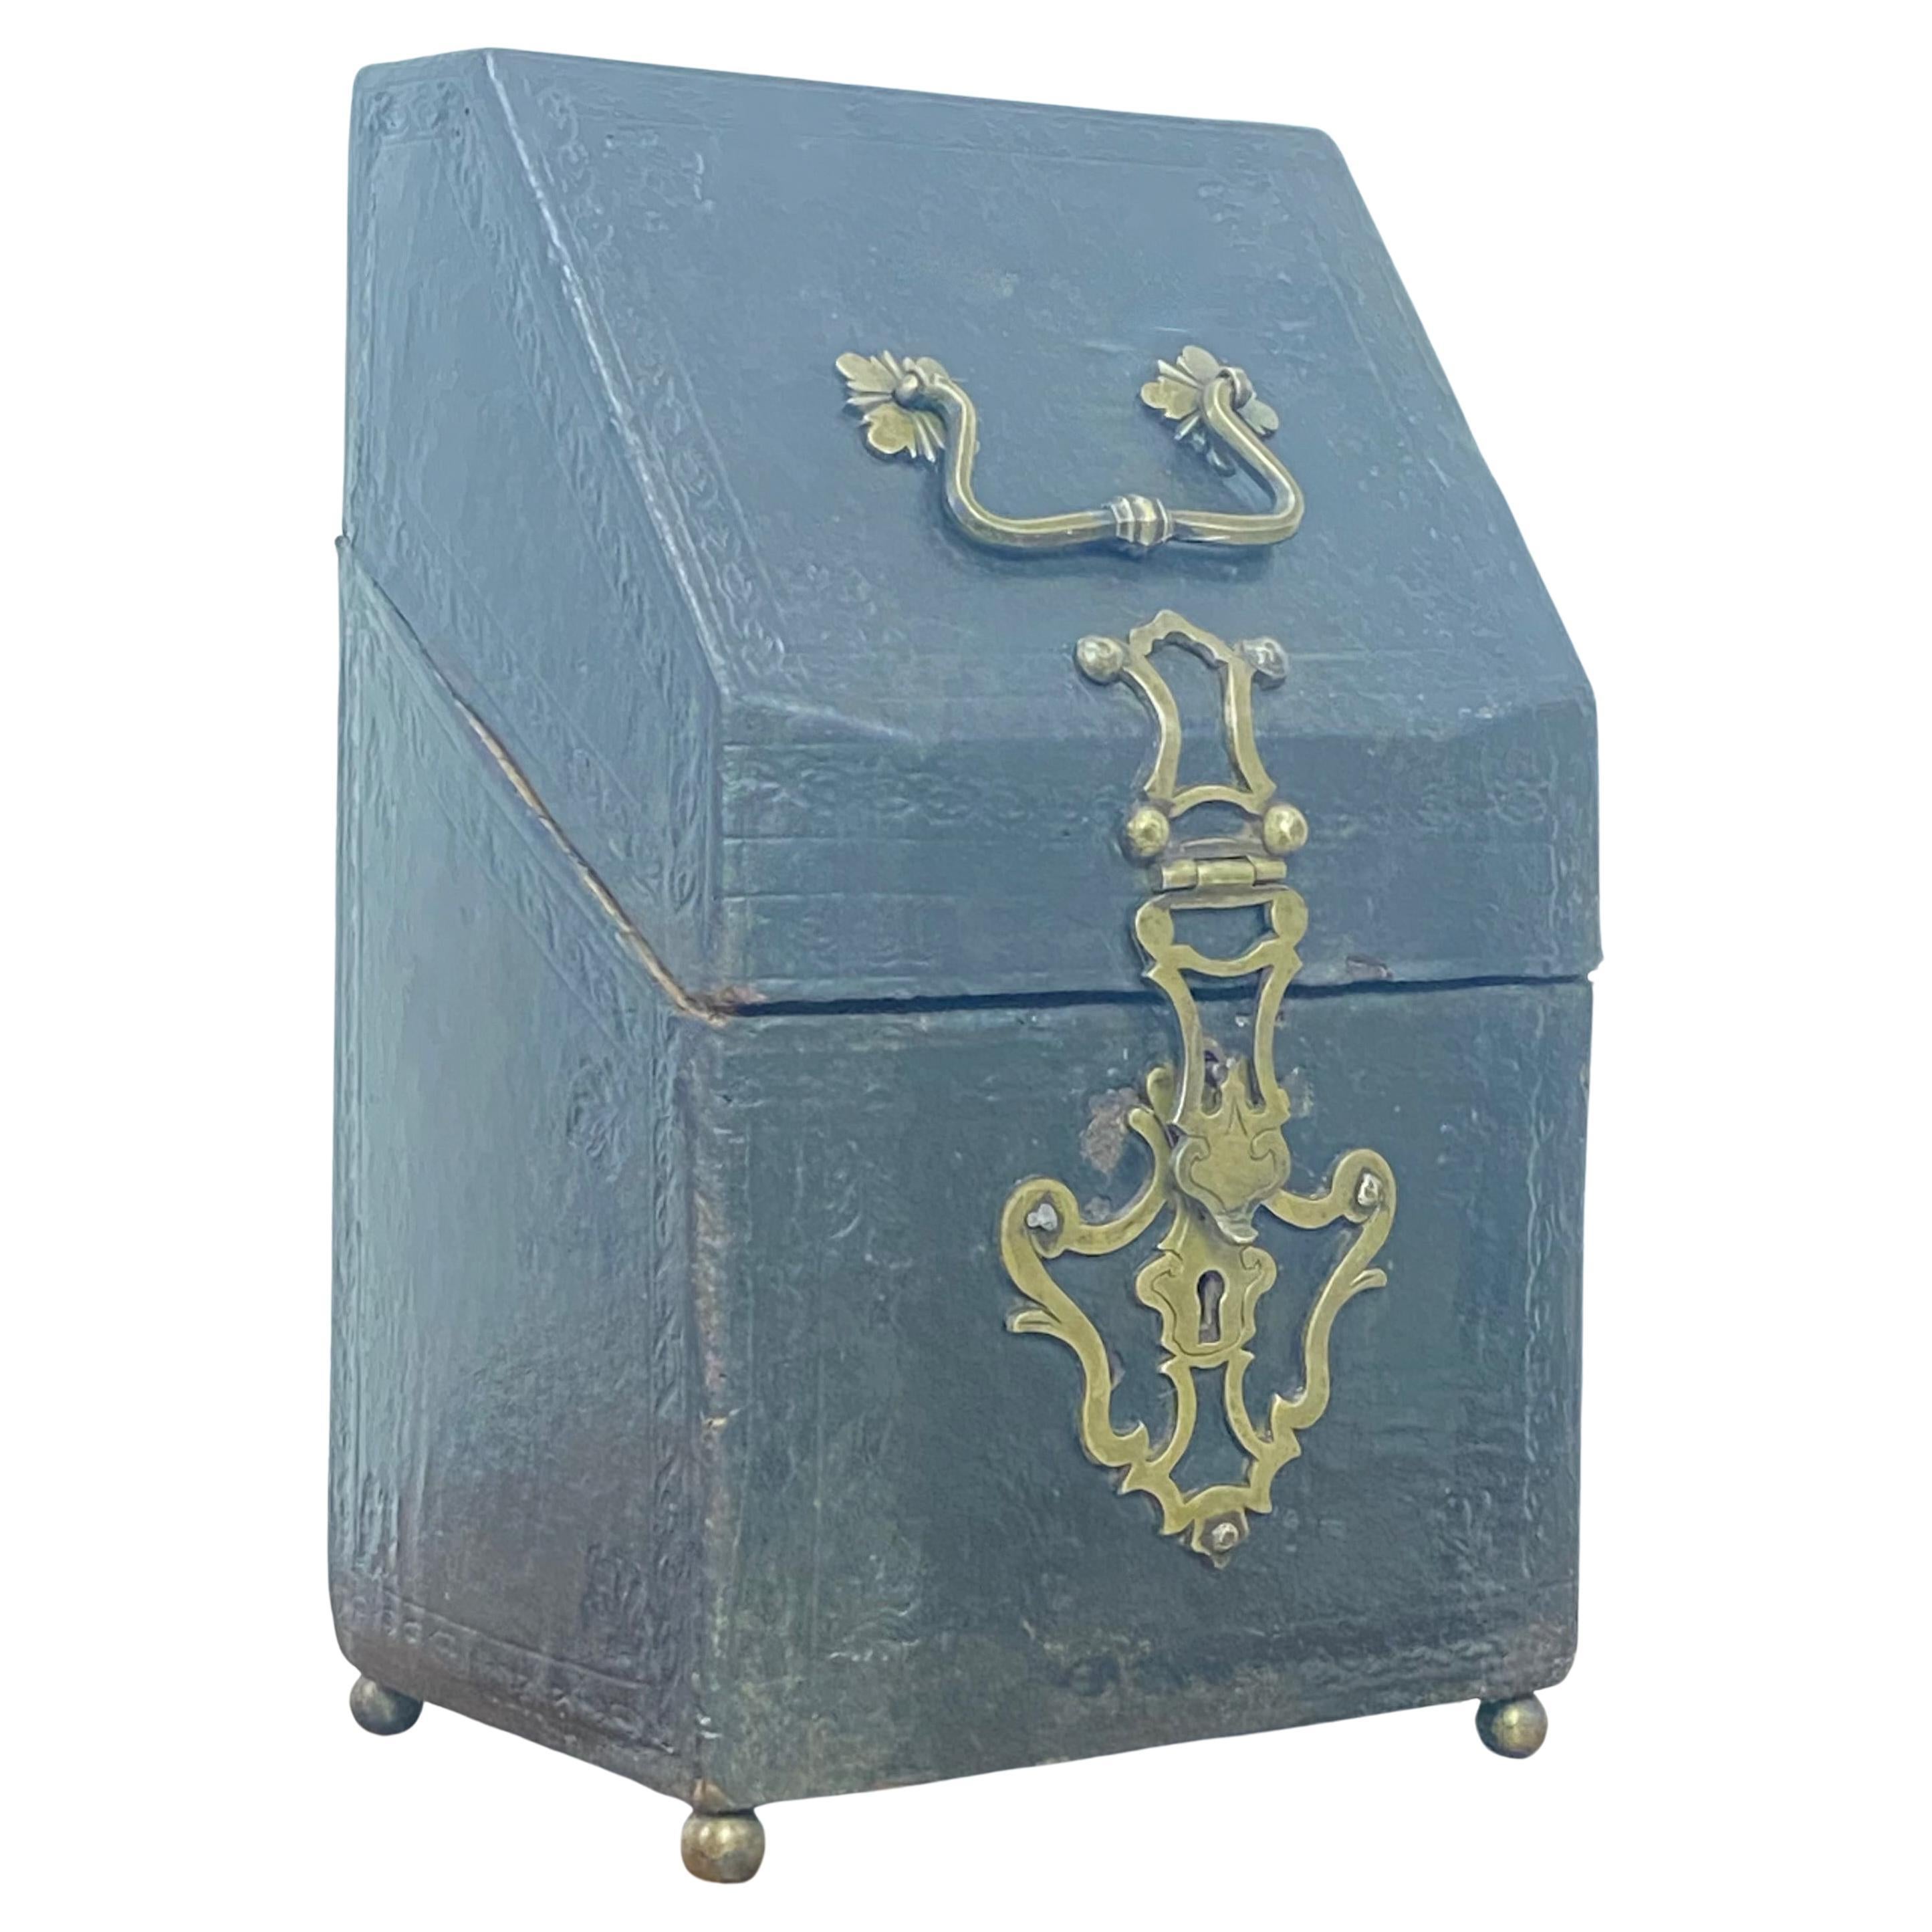 17th Century English Leather Covered Knife Box Converted To a Letter Box